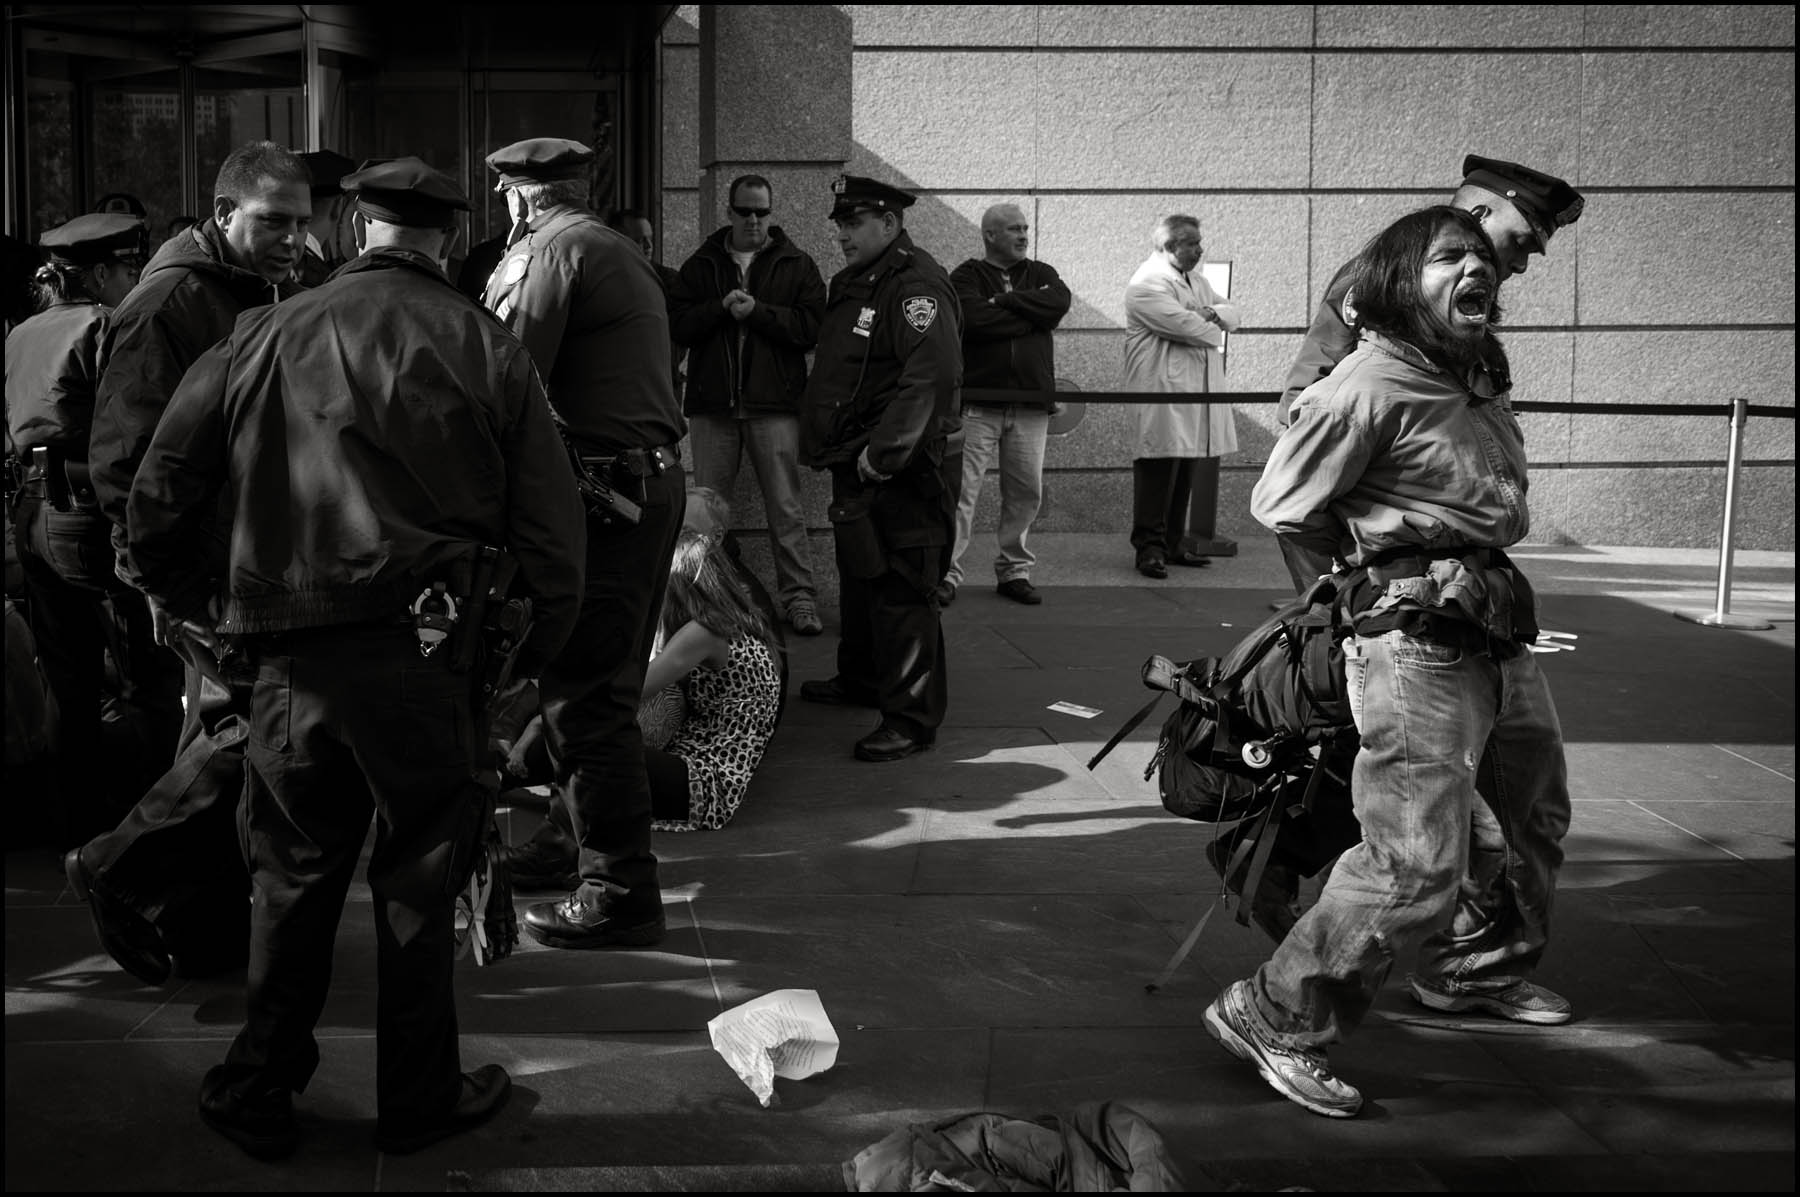 Occupy Wall Street protesters get arrested in front of Goldman Sachs headquarters in Battery Park City after they held a mock trial against the company at Zuccoti Park and marched to the building with their guilty verdict. Approximately 15-20 protesters were arrested in an act of civil disobedience.